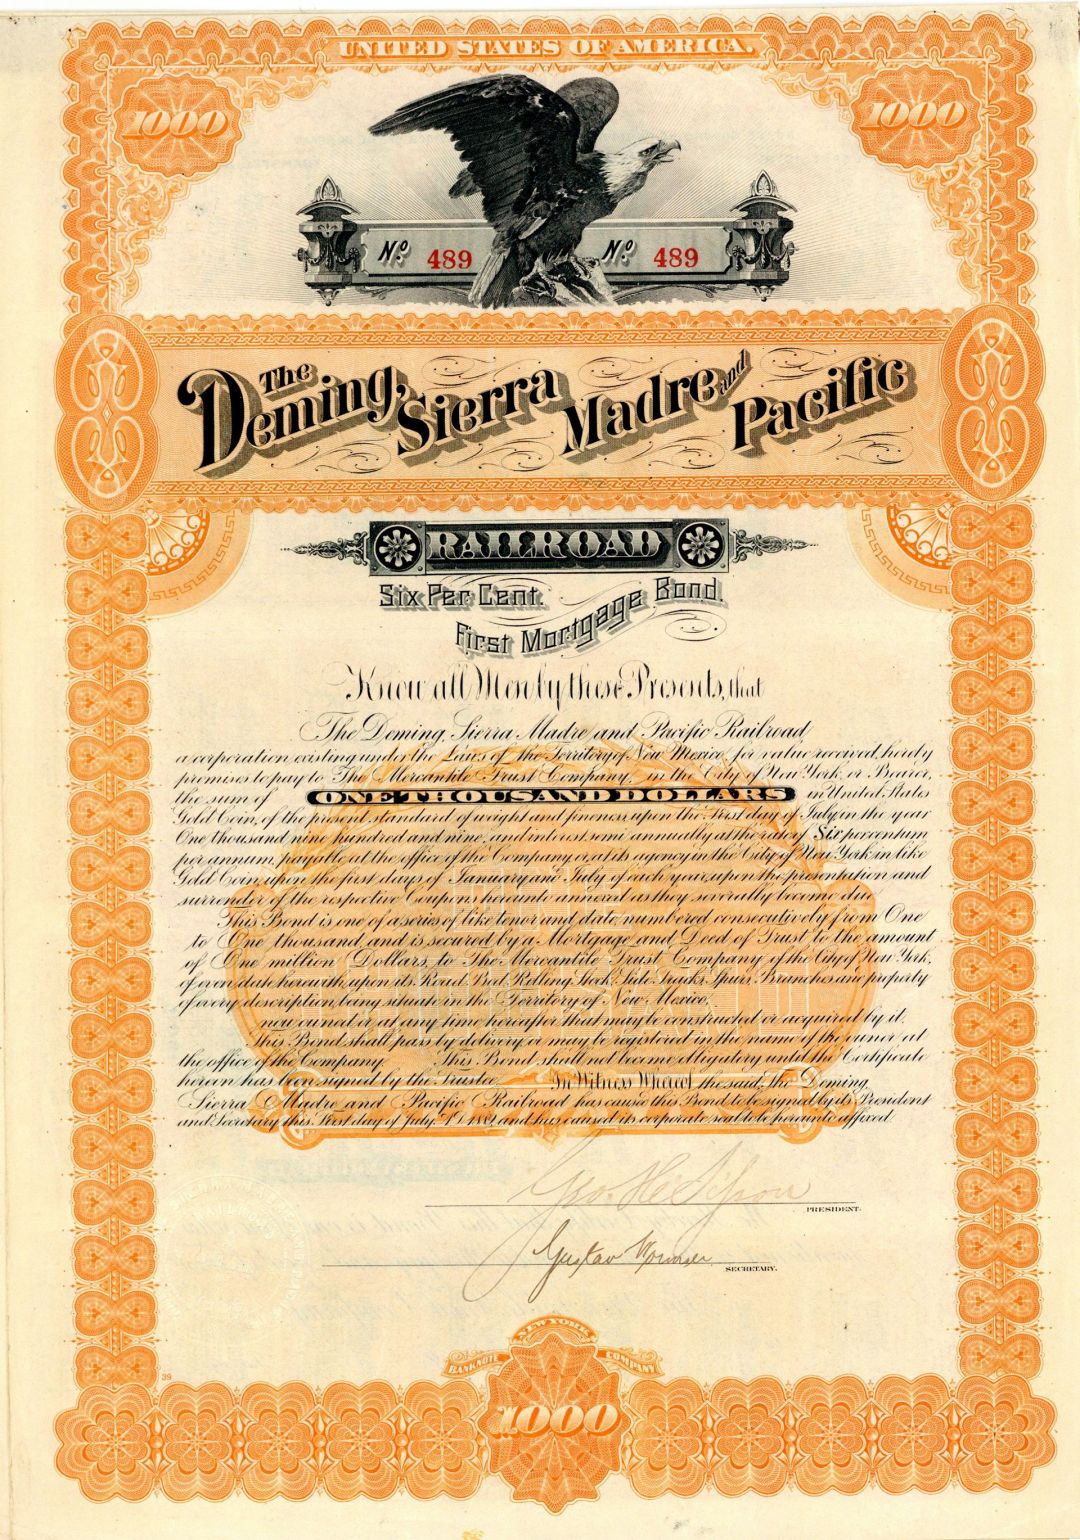 Deming, Sierra Madre and Pacific Railroad Gold Bond - 1889 dated $1,000 6% First Mortgage Railway Uncanceled Bond